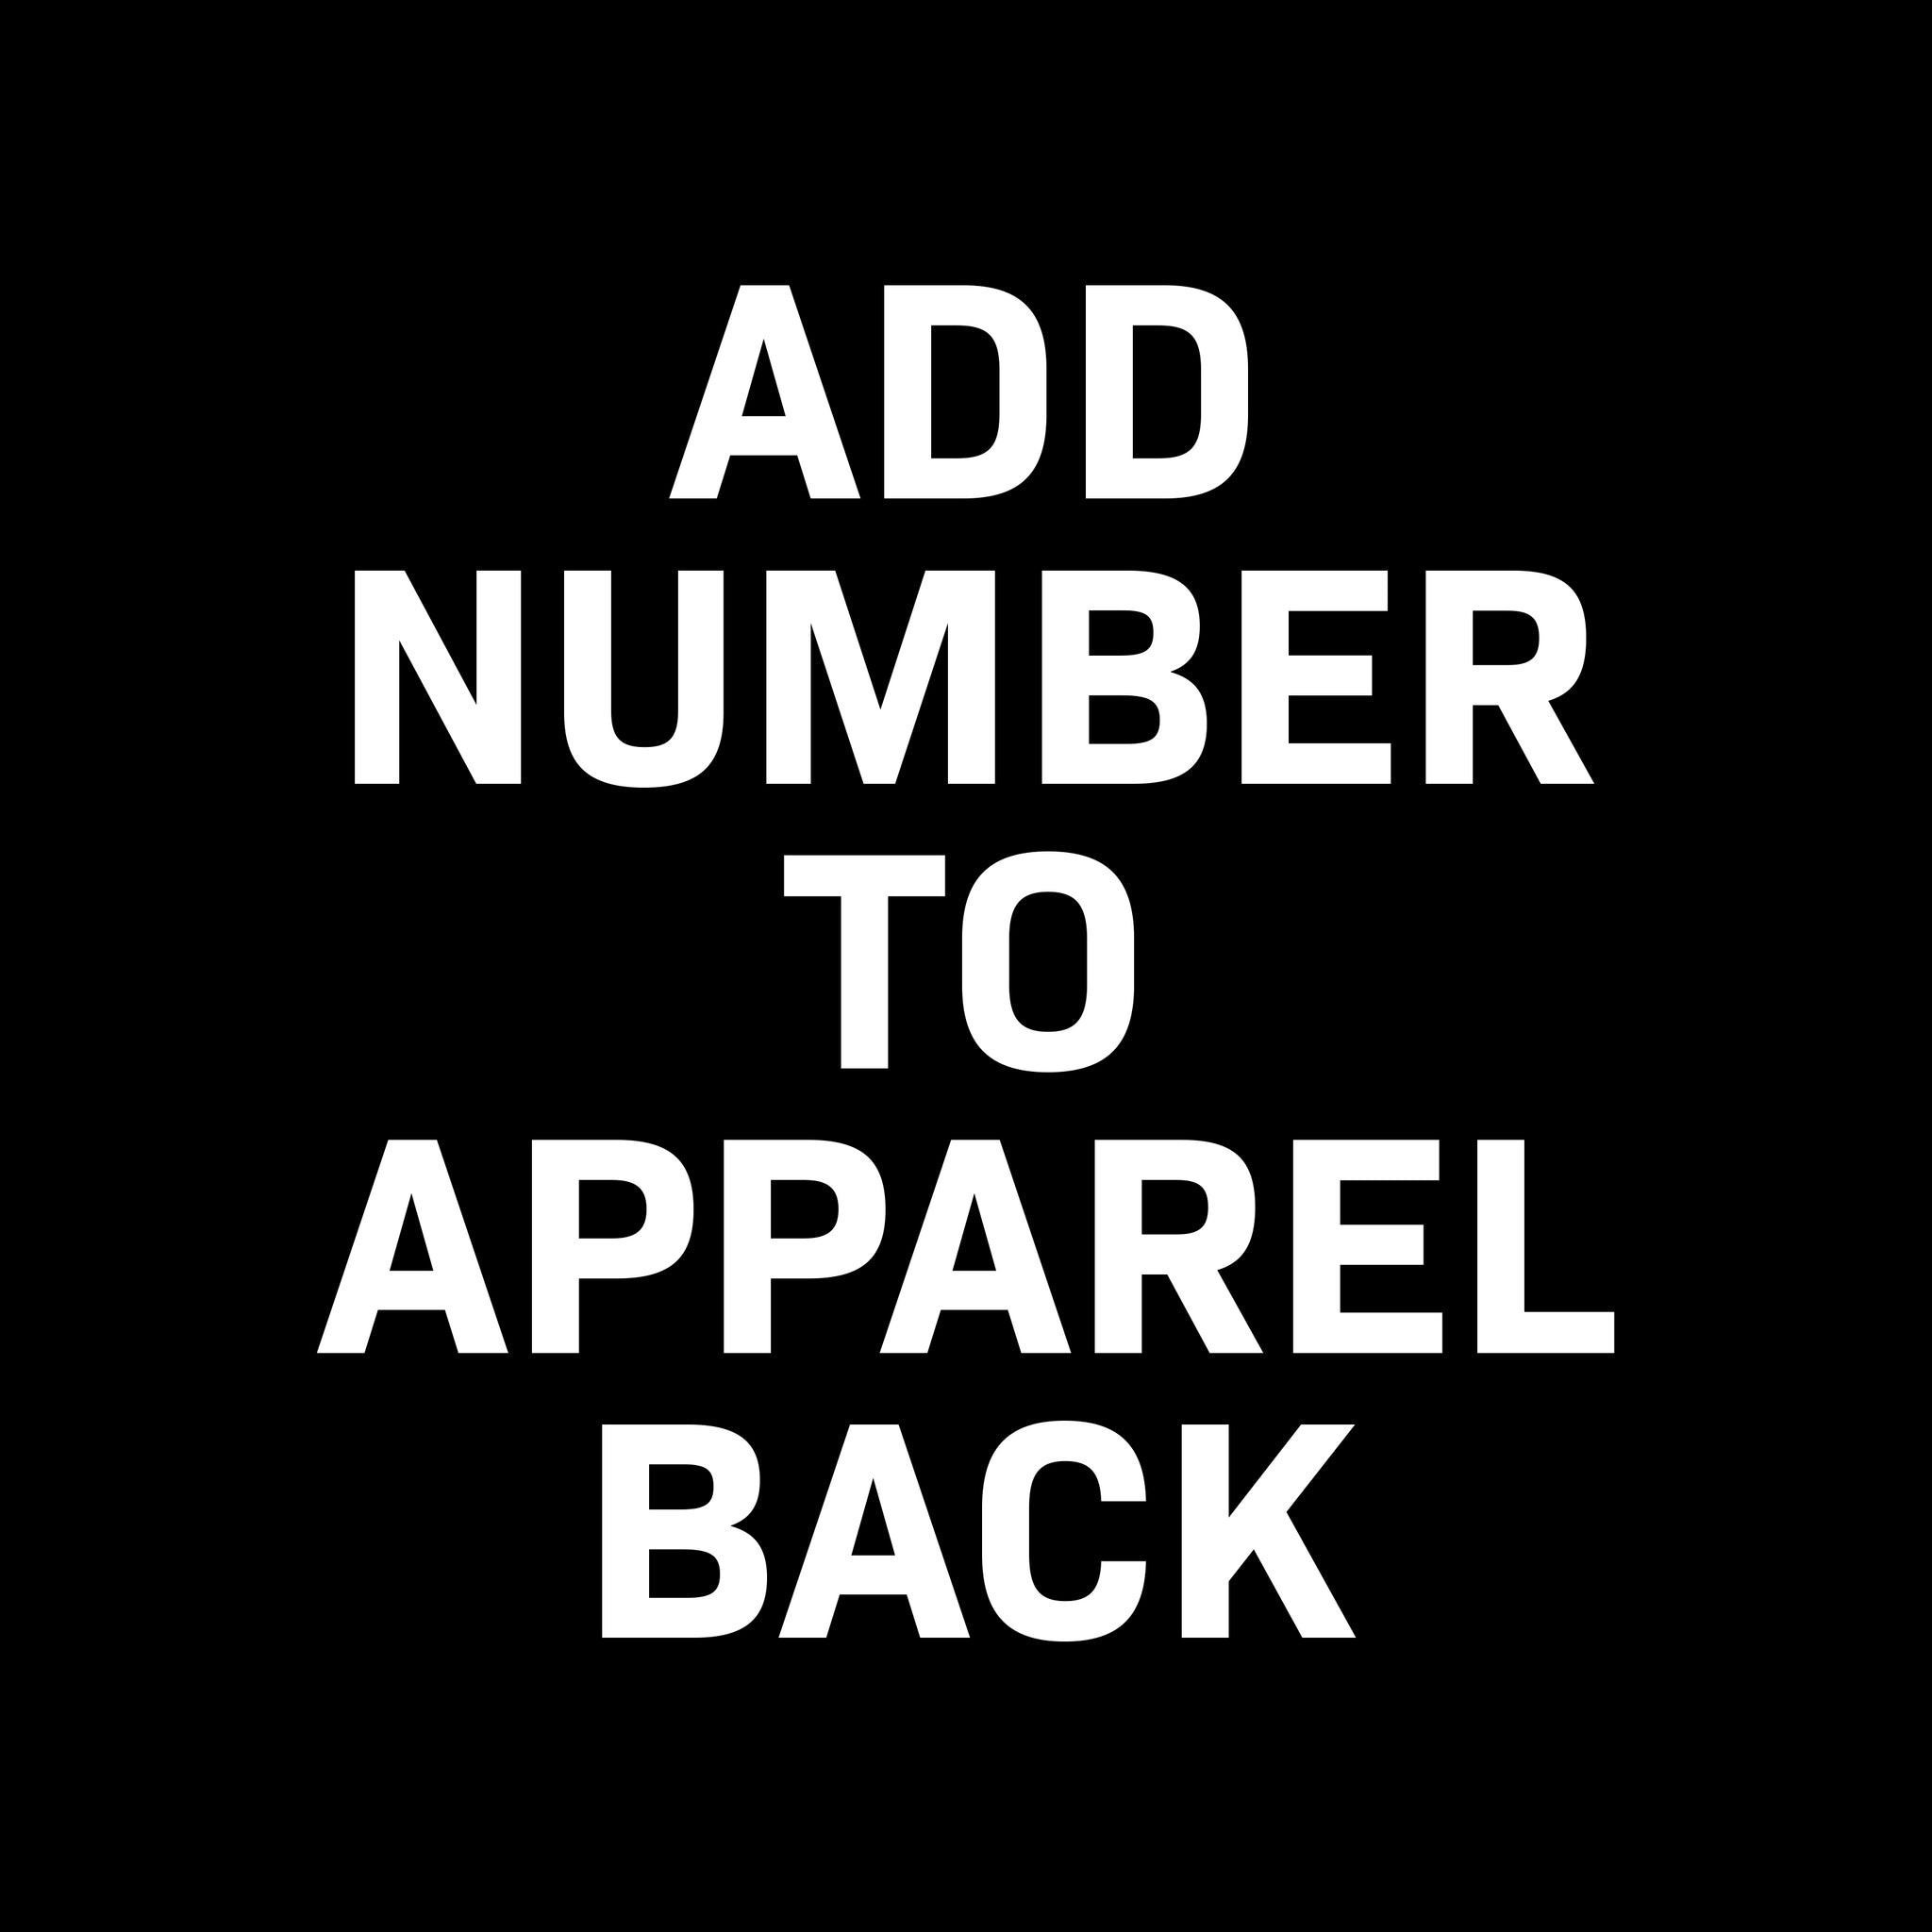 Add Number to Apparel